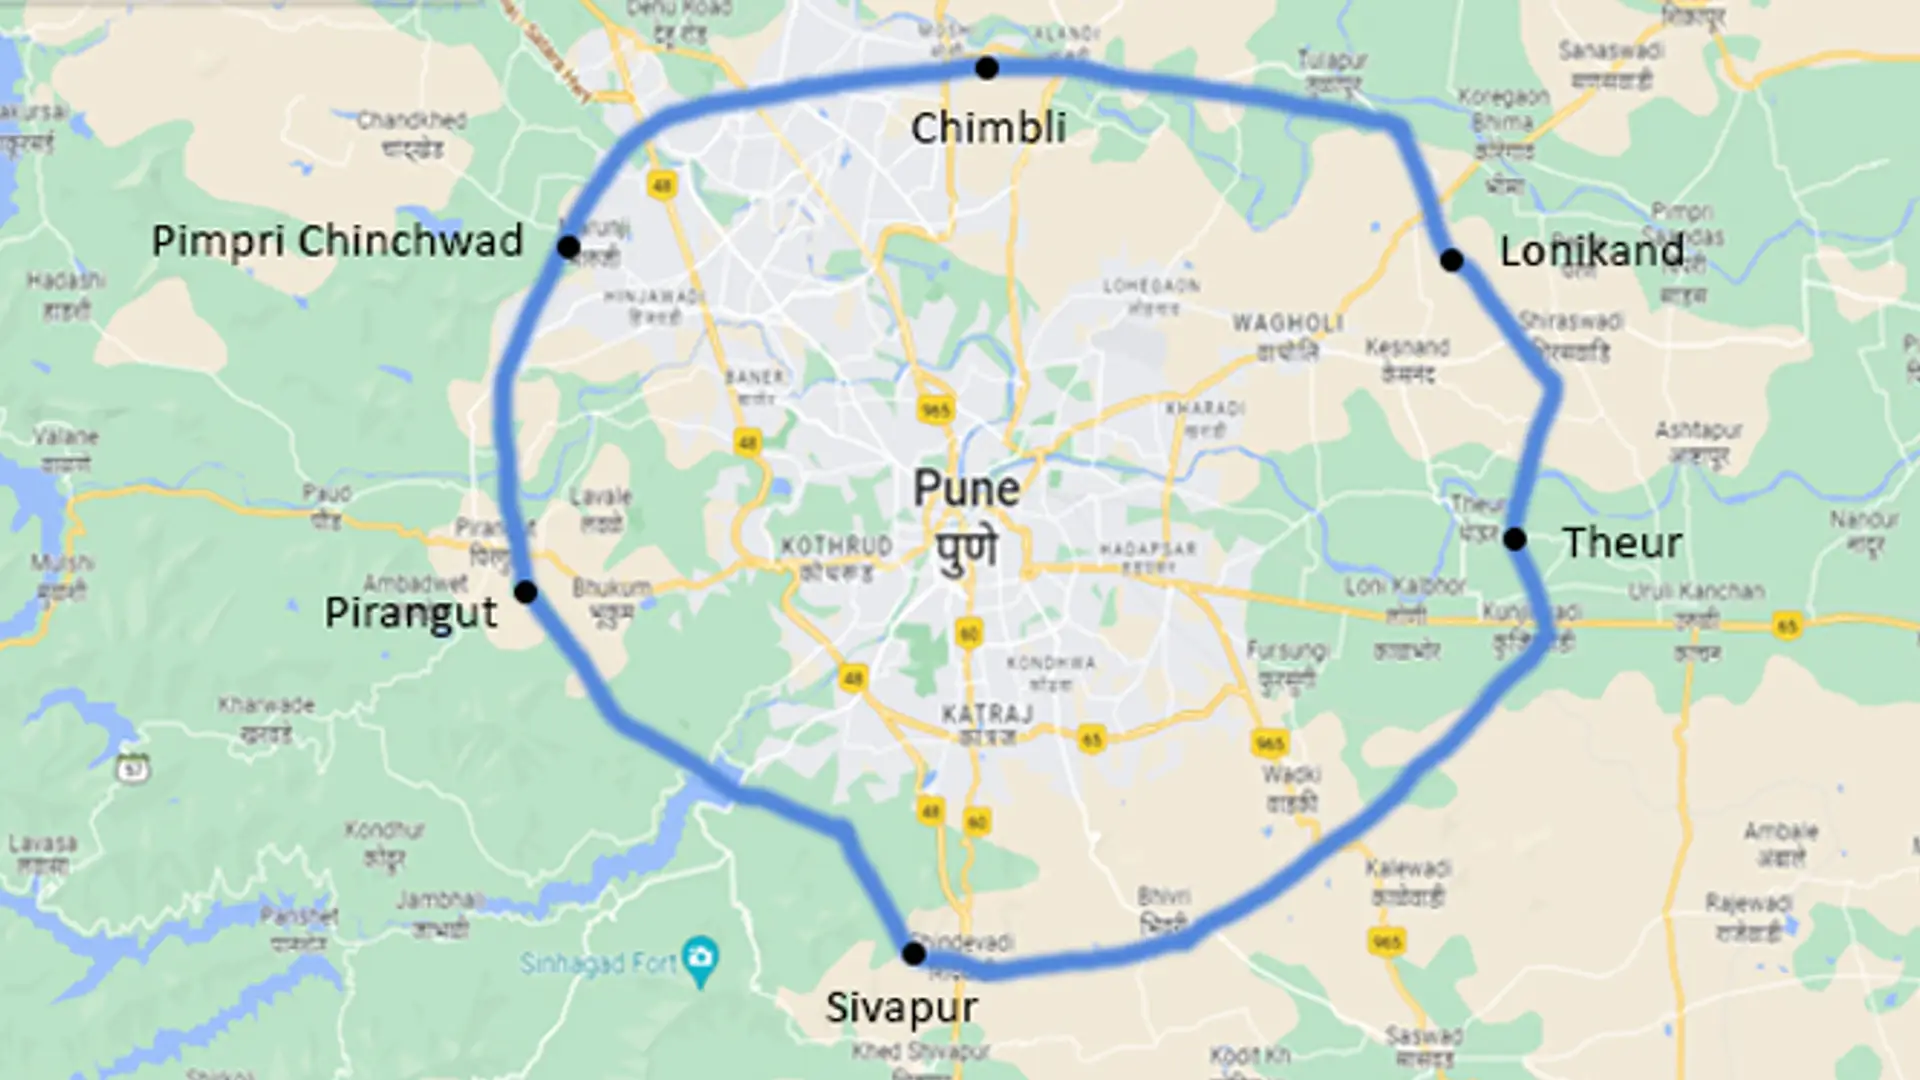 Pune to get 170 km ring road at Rs 26,000 cr - Construction Week India